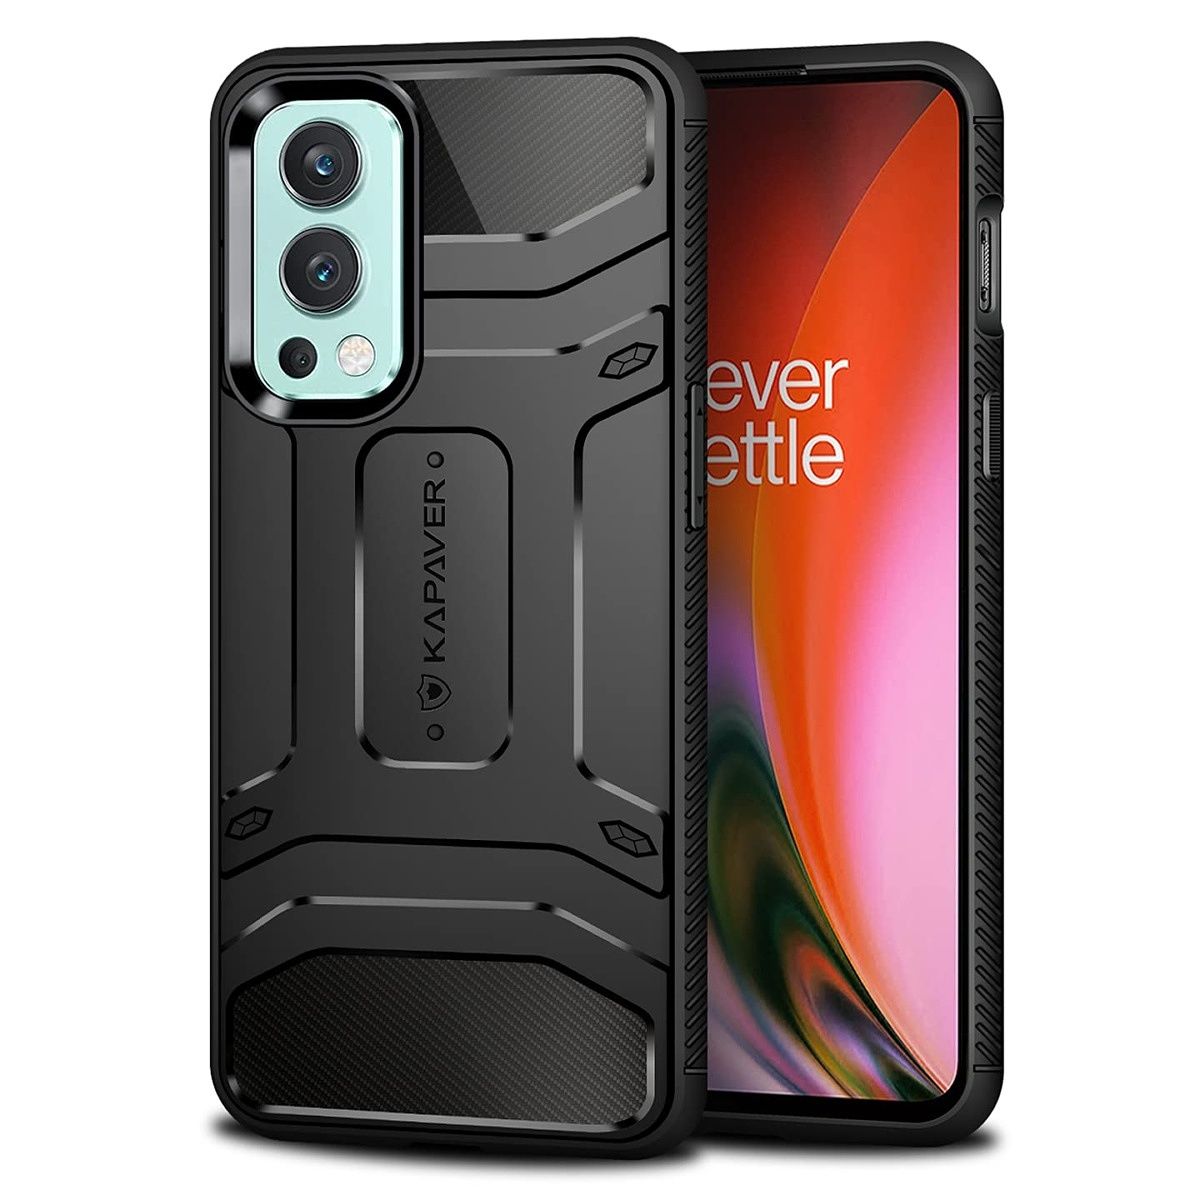 This case from Kapaver is rugged both in terms of protection as well as looks. It's a great option for serious protection.